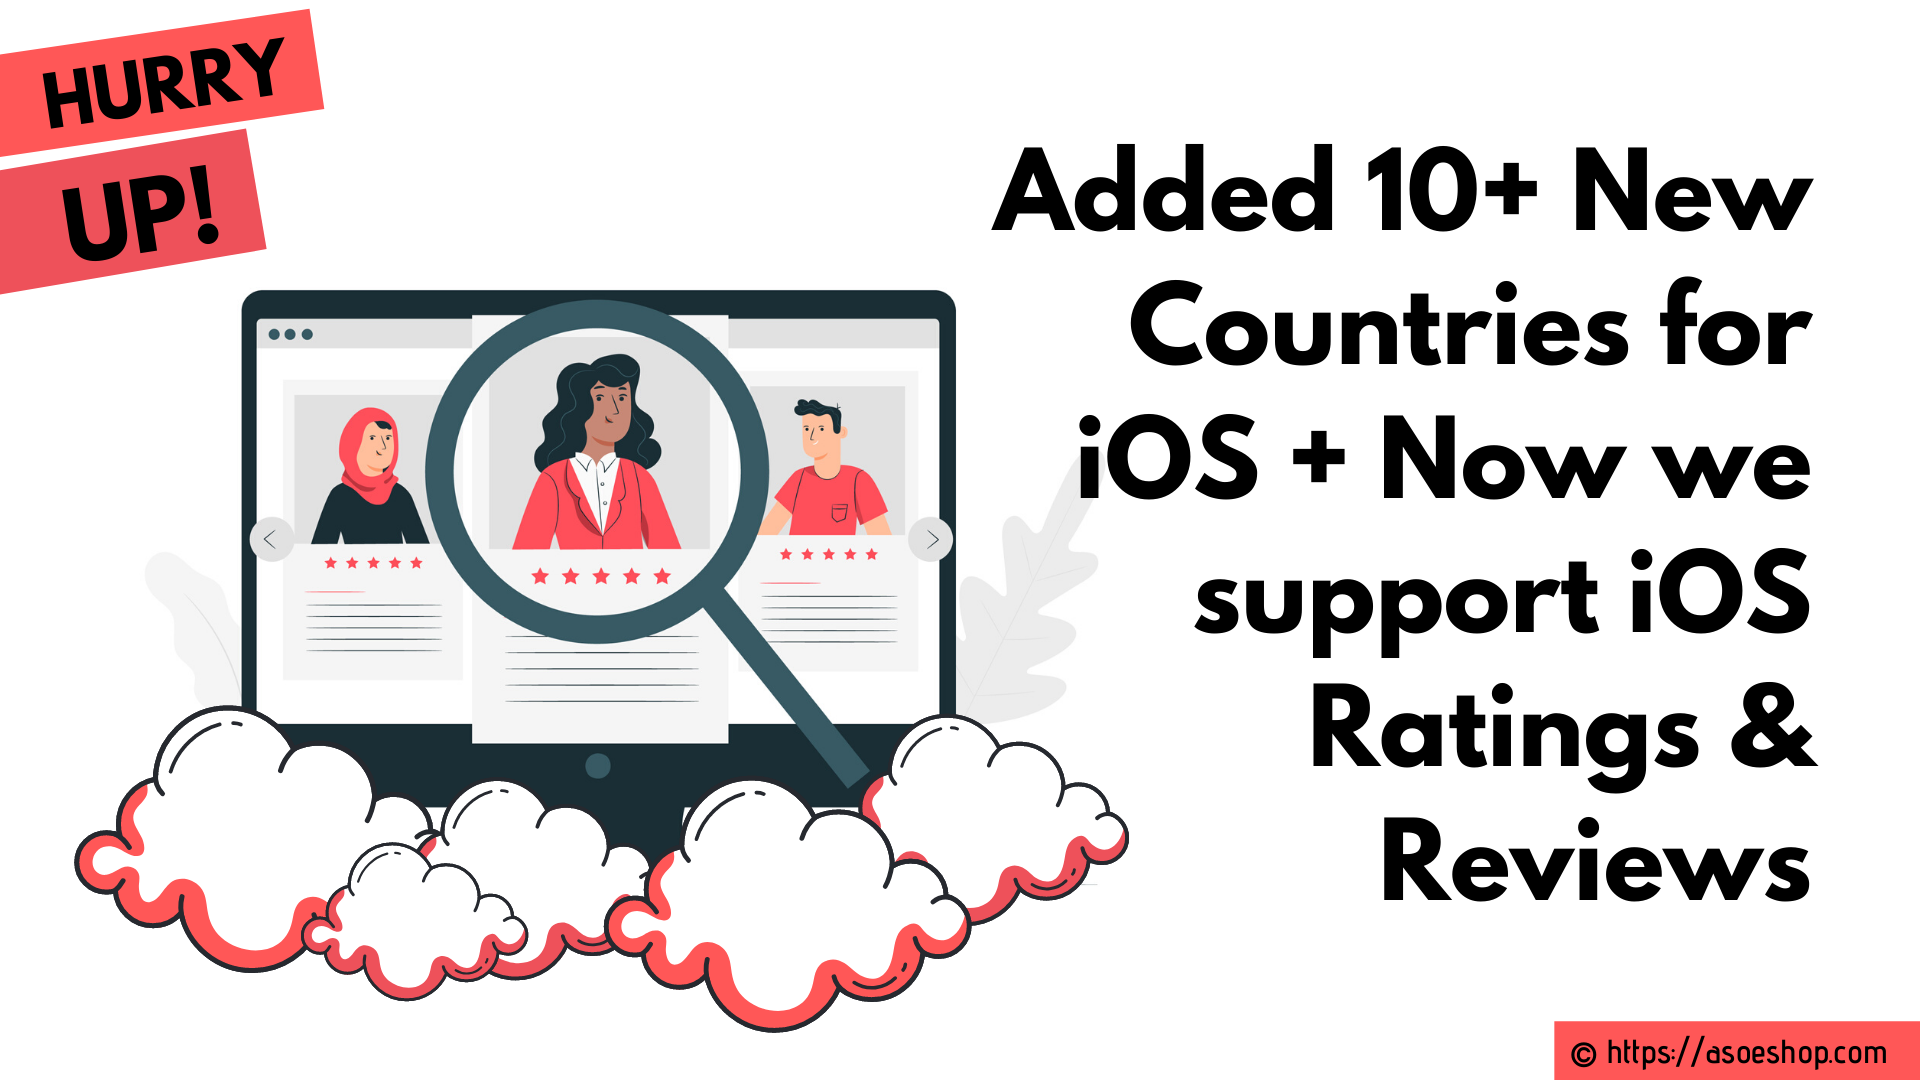 Added 10+ New Countries for iOS + Now we support iOS Ratings & Reviews as well